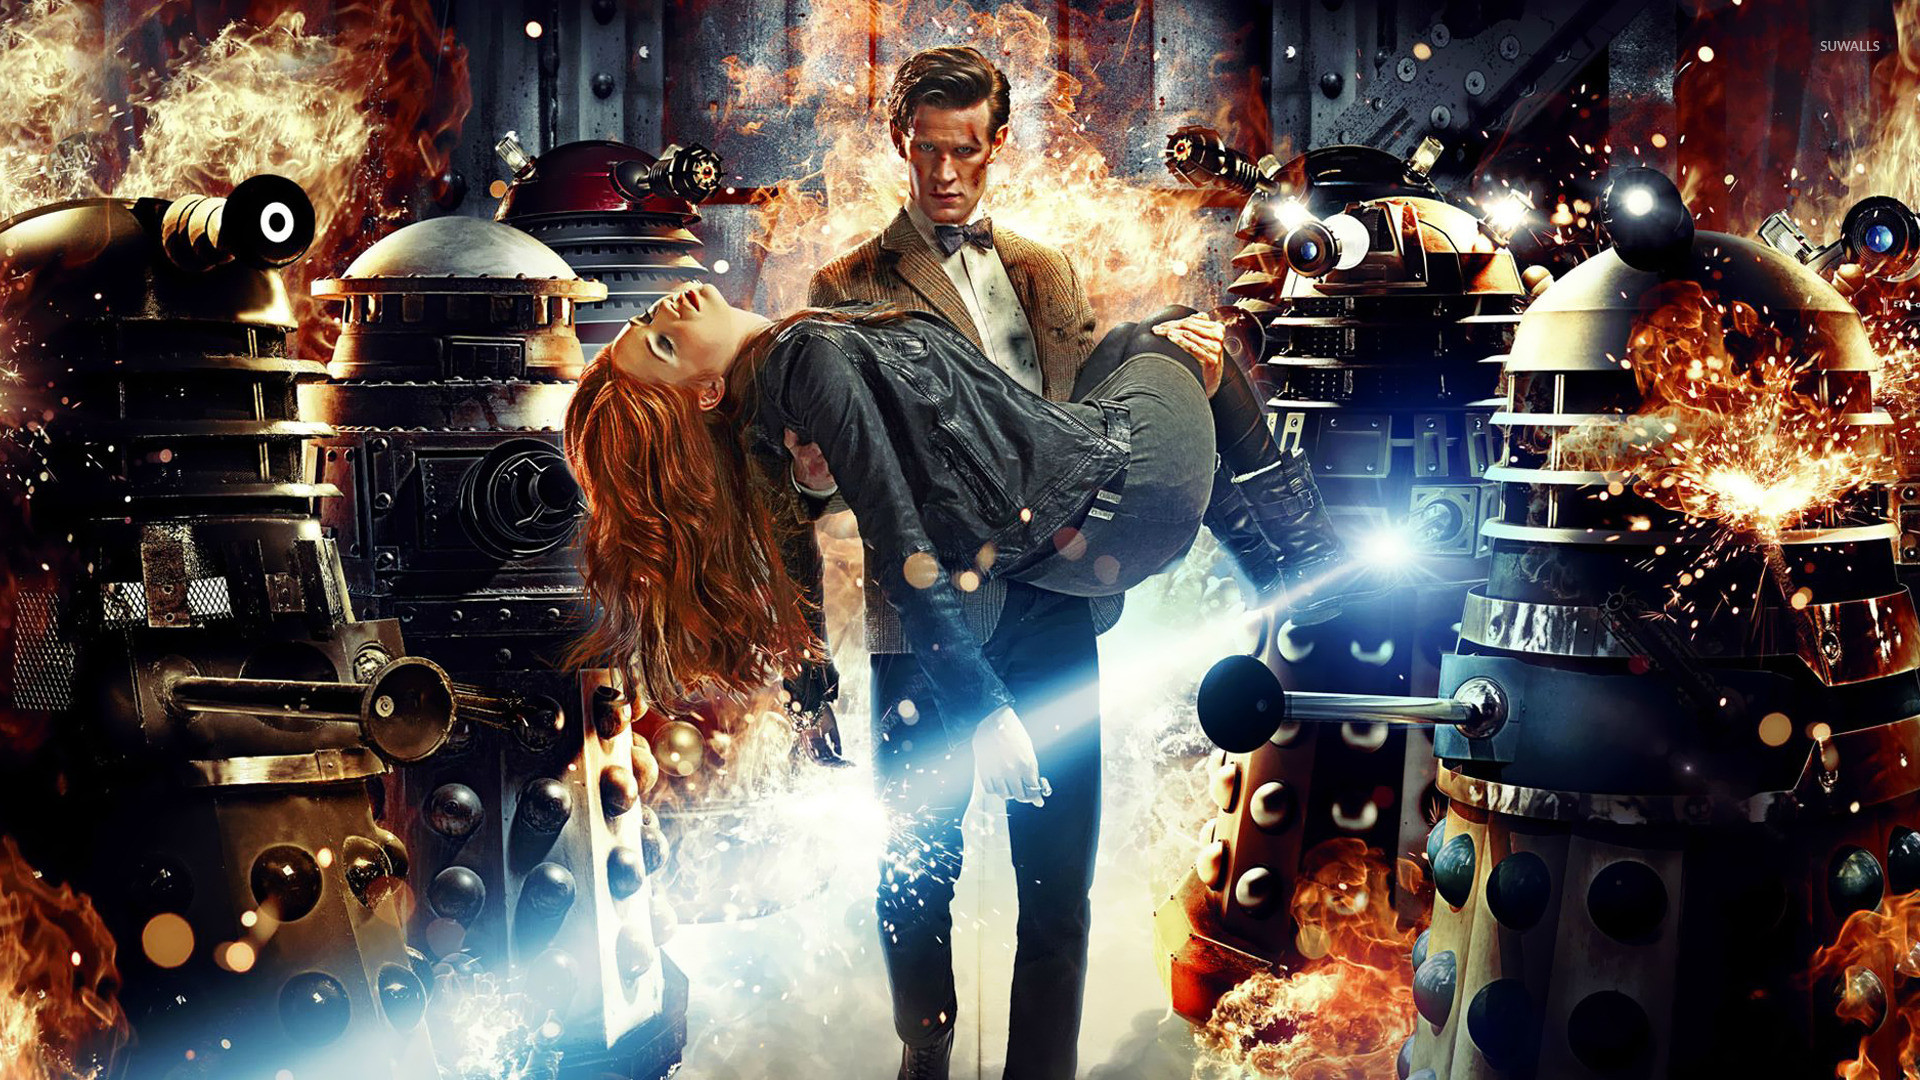 1920x1080 The Doctor and Amy Pond - Doctor Who wallpaper